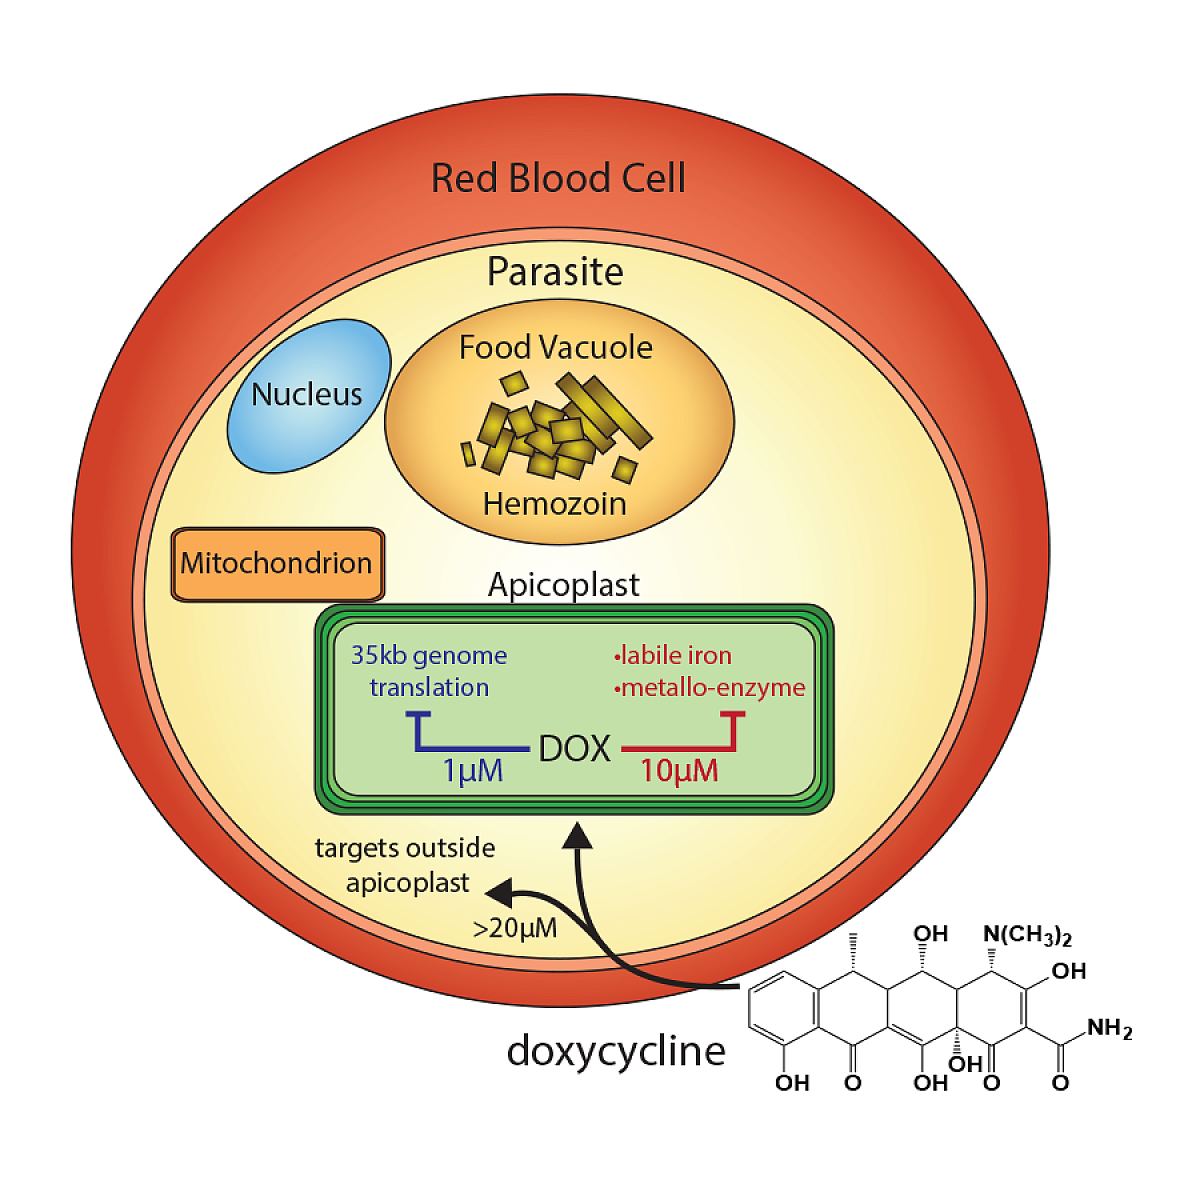 Summary of the anti-parasitic mechanisms of doxycycline that operate at different drug concentrations.